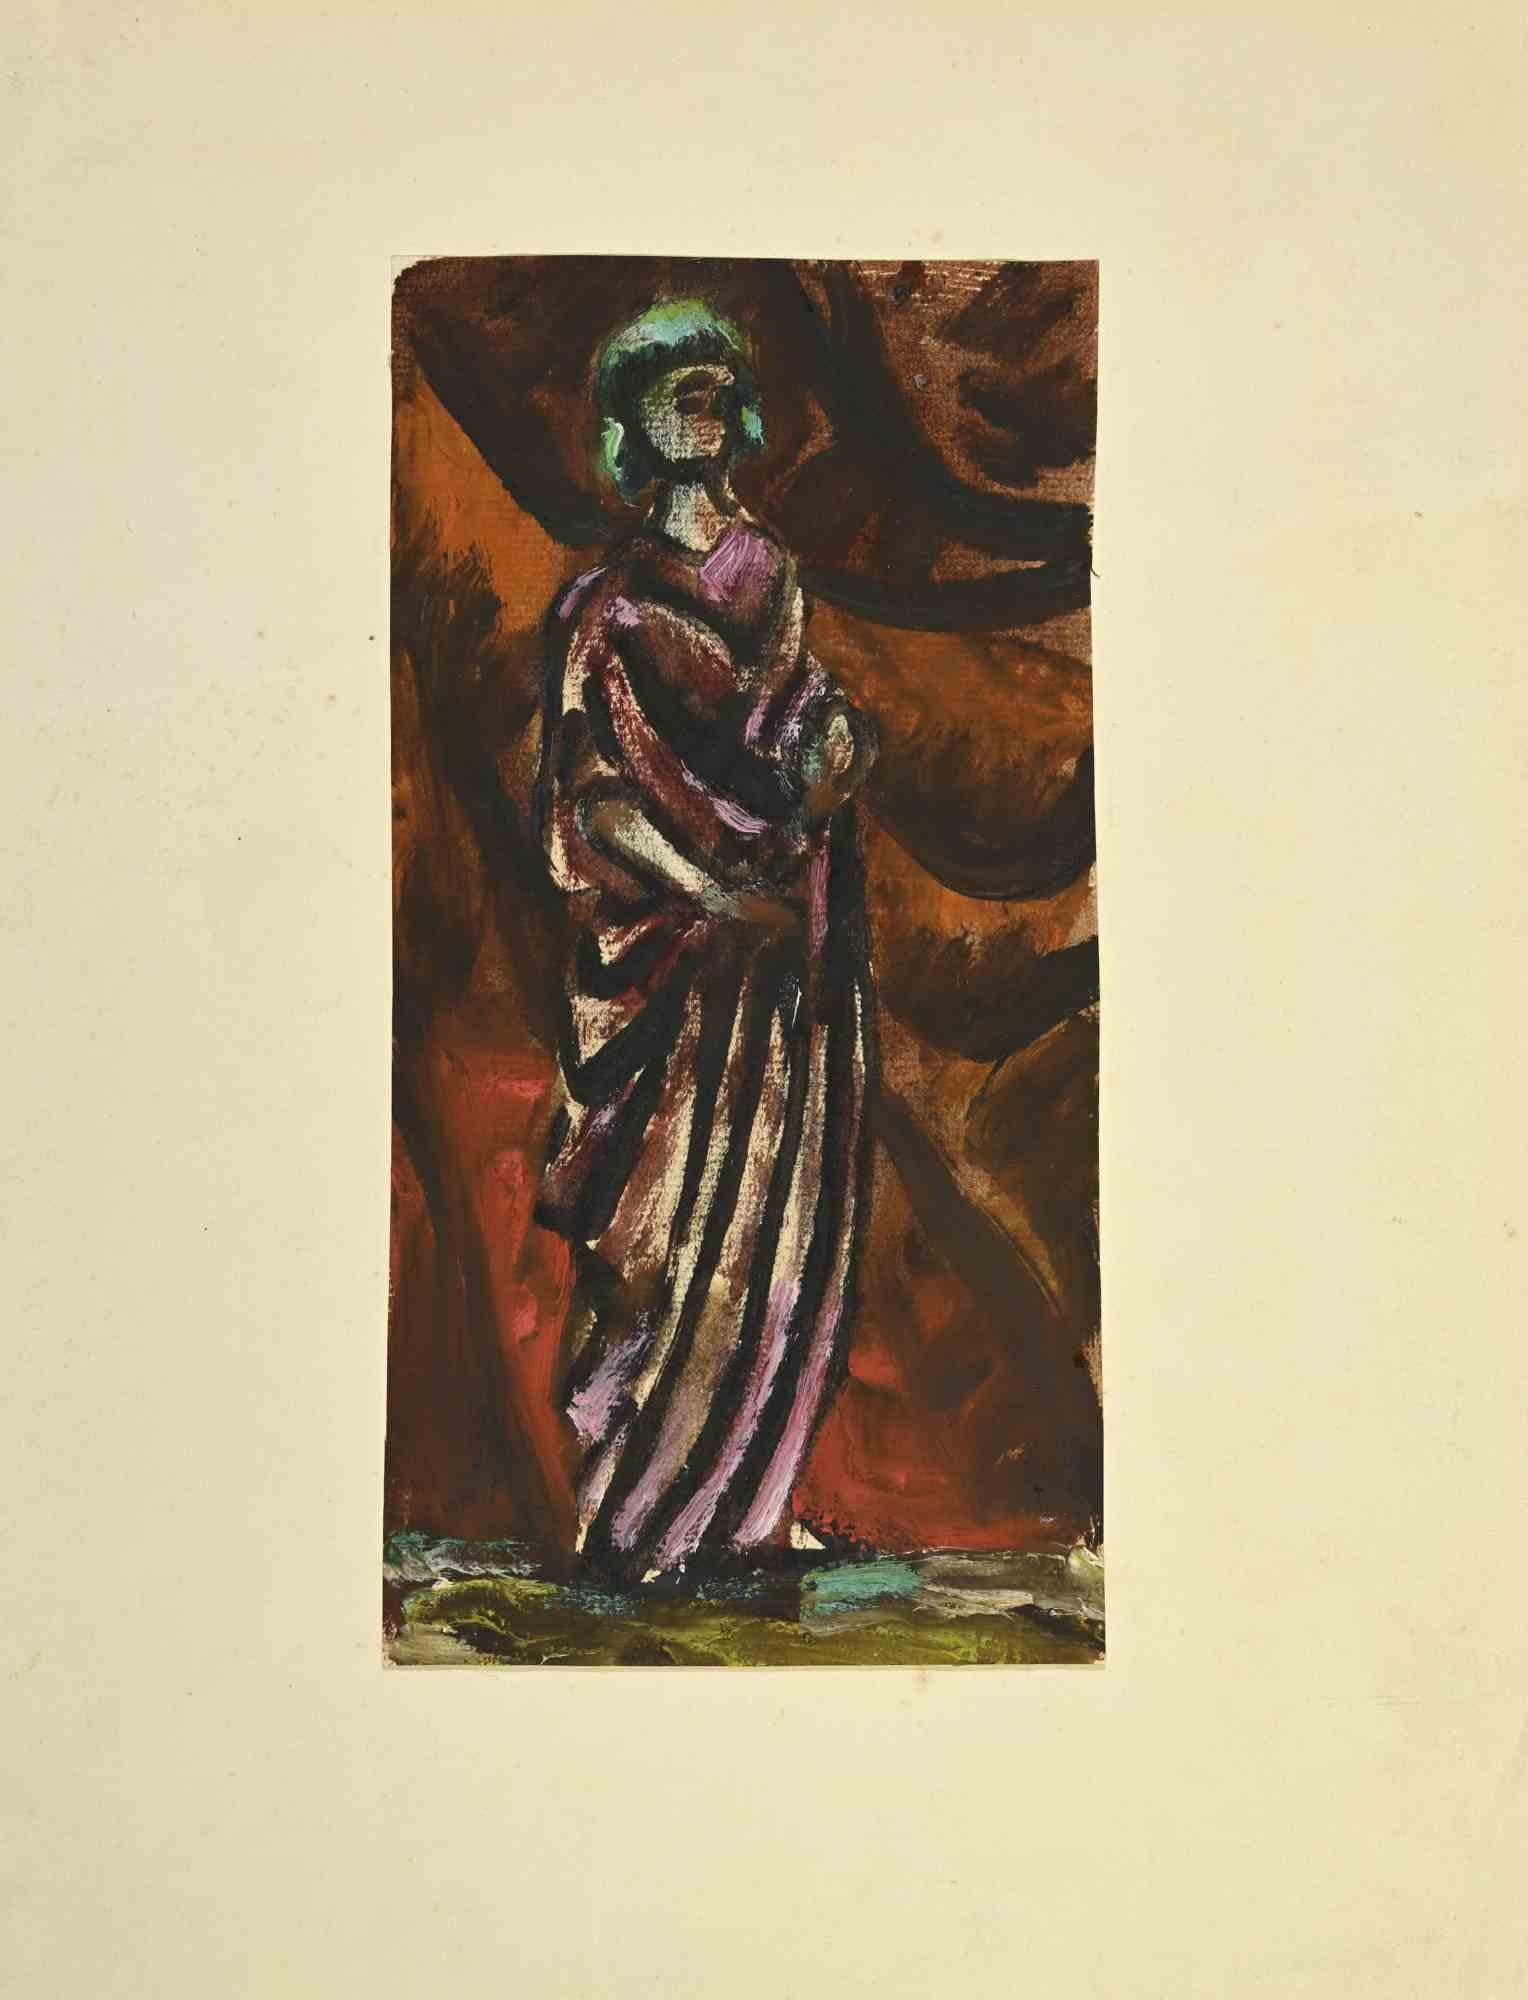 A Draped Woman is a drawing realized in 1920s,  by the Artist Ernest Fouard (1883- 1959) . 

Mixed media on paper. Hand Signed on back.

The work is glued on ivory cardboard.

Total dimensions: 32.5 x 25 cm.

The artist wants to define a